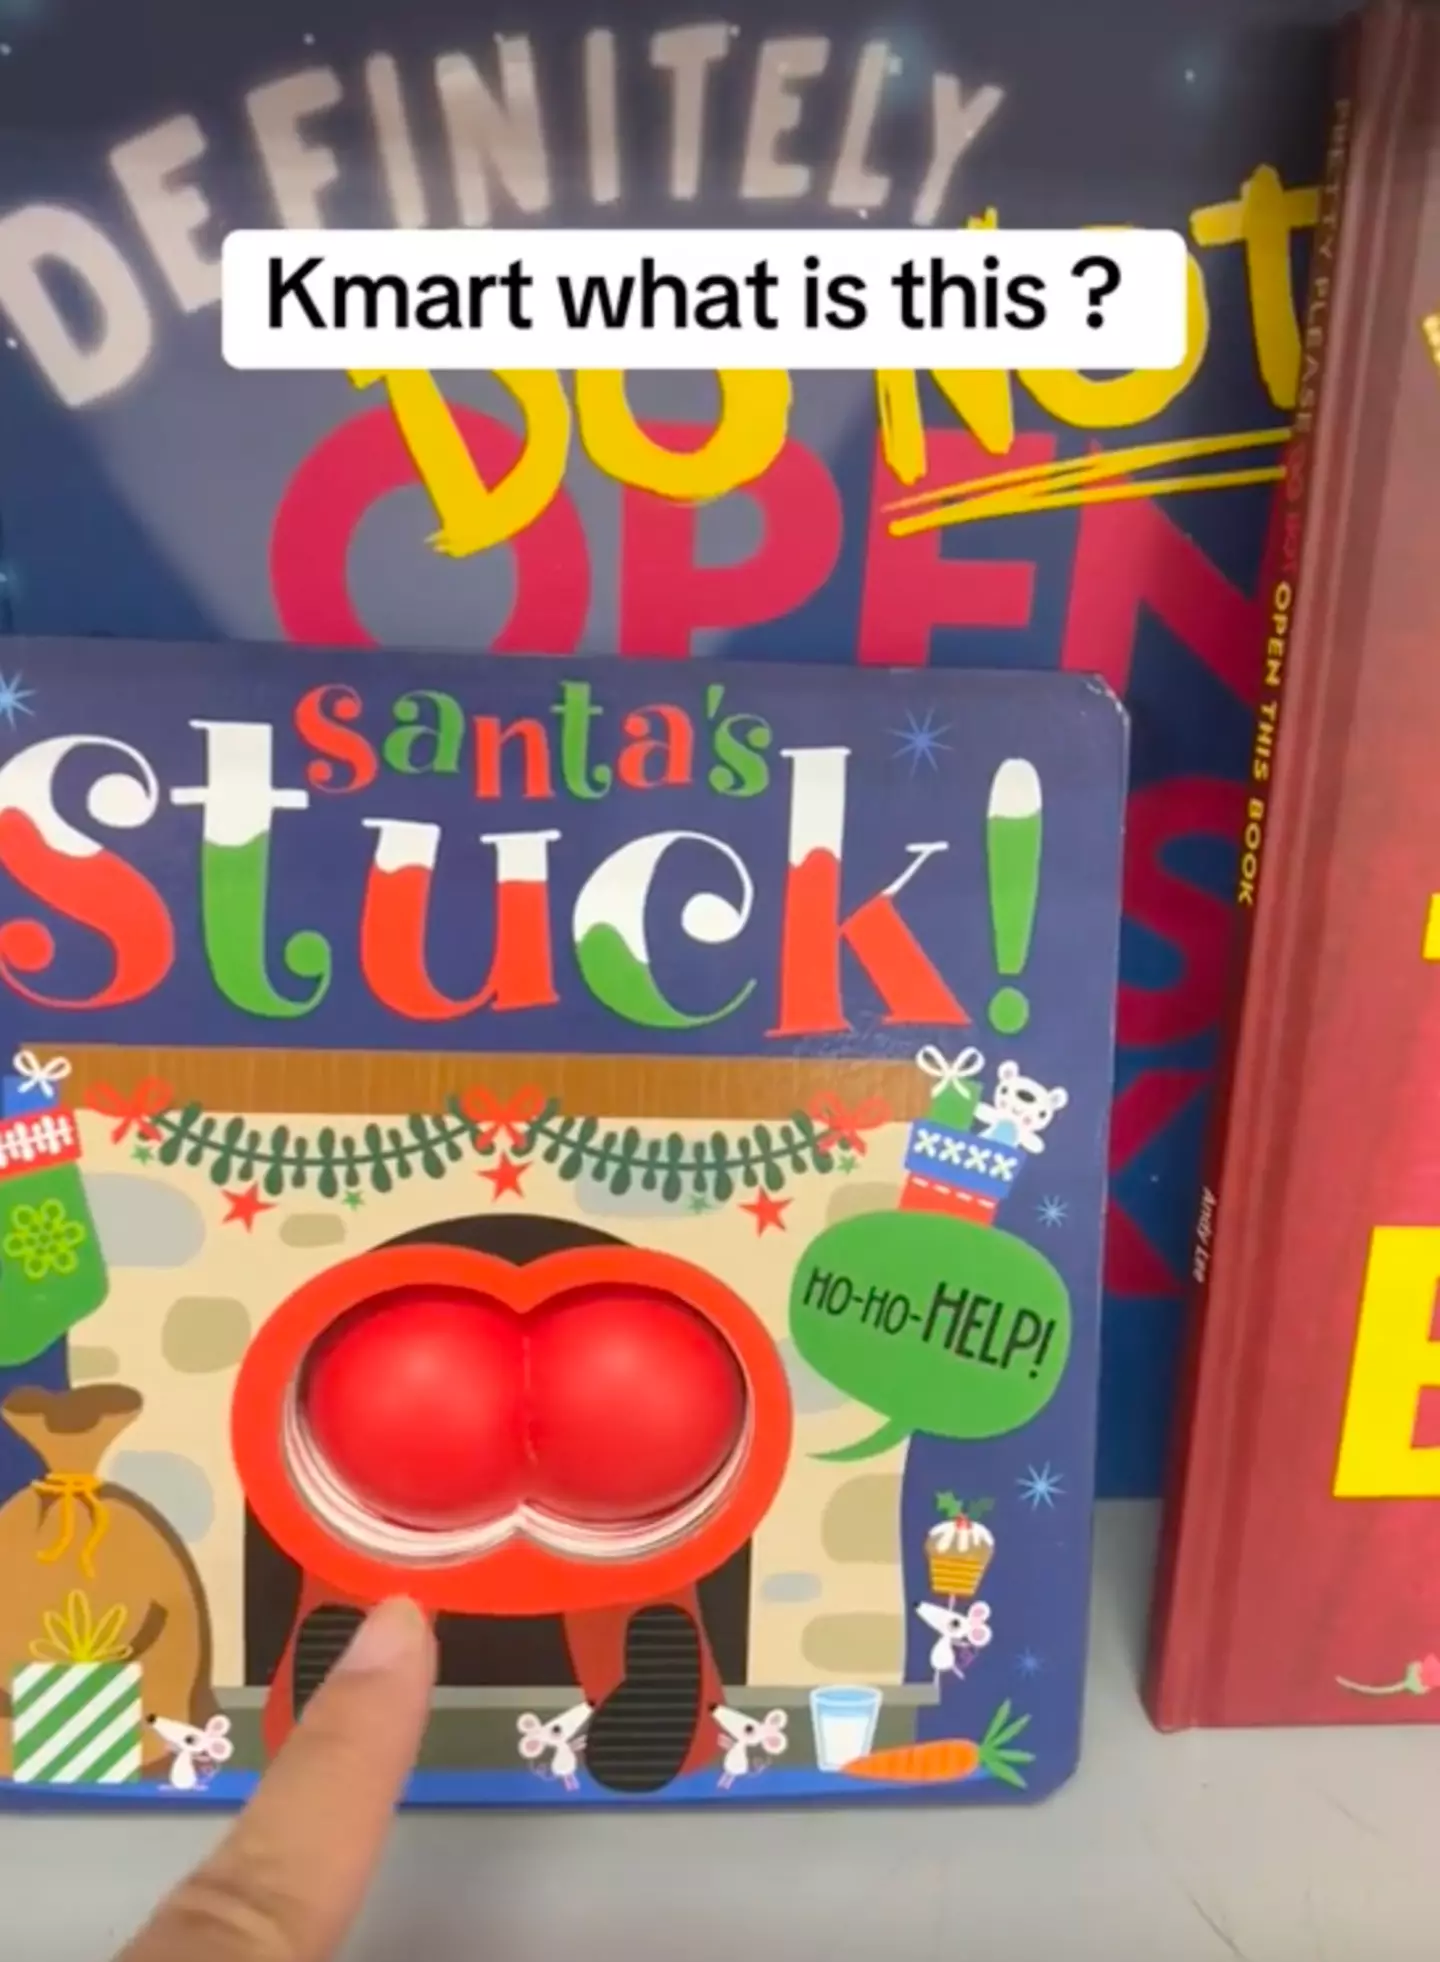 The book featured Santa's behind front and centre.